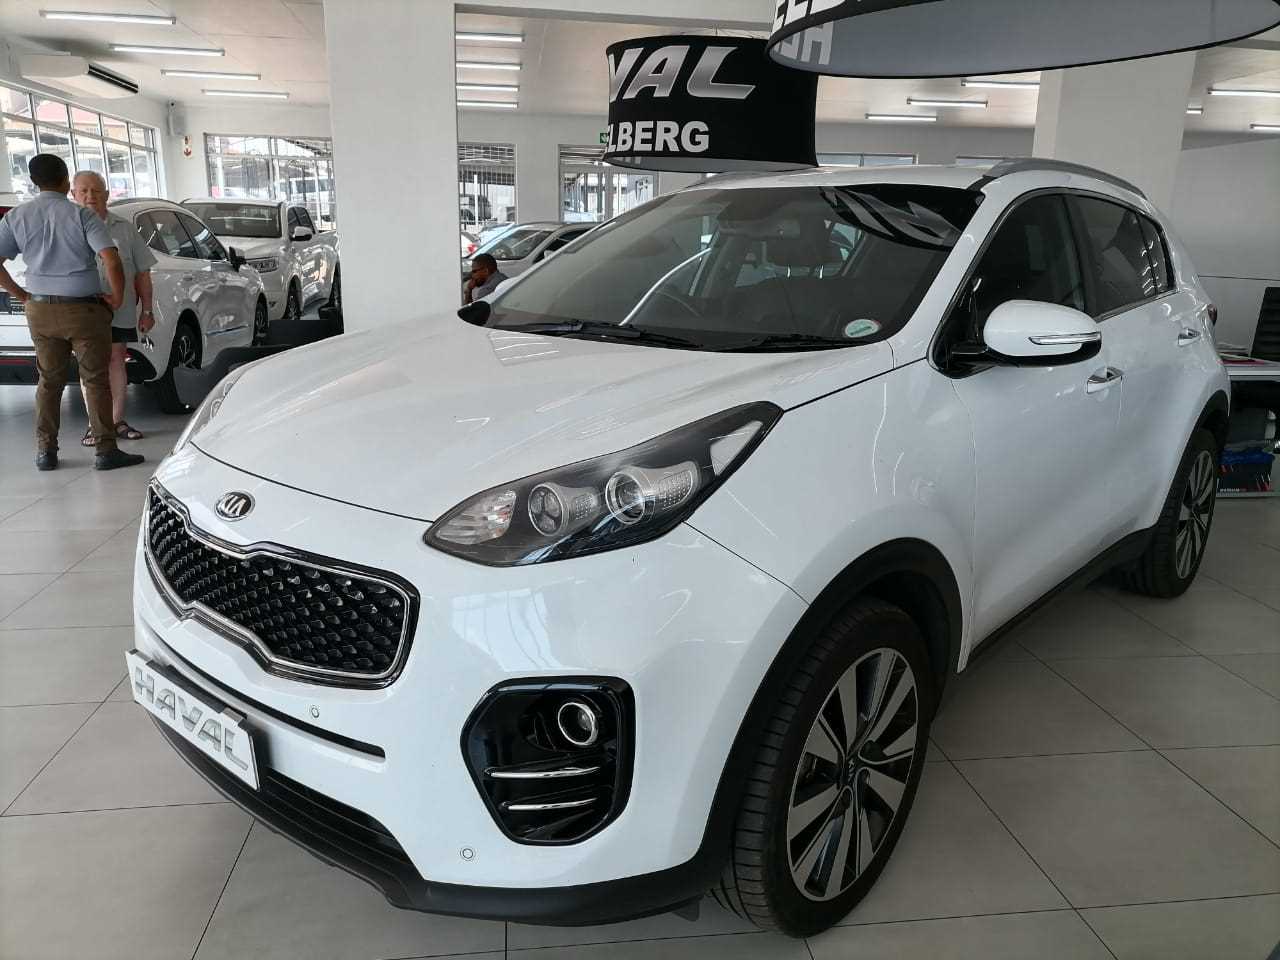 KIA SPORTAGE 2.0 CRDI EX A/T for Sale in South Africa